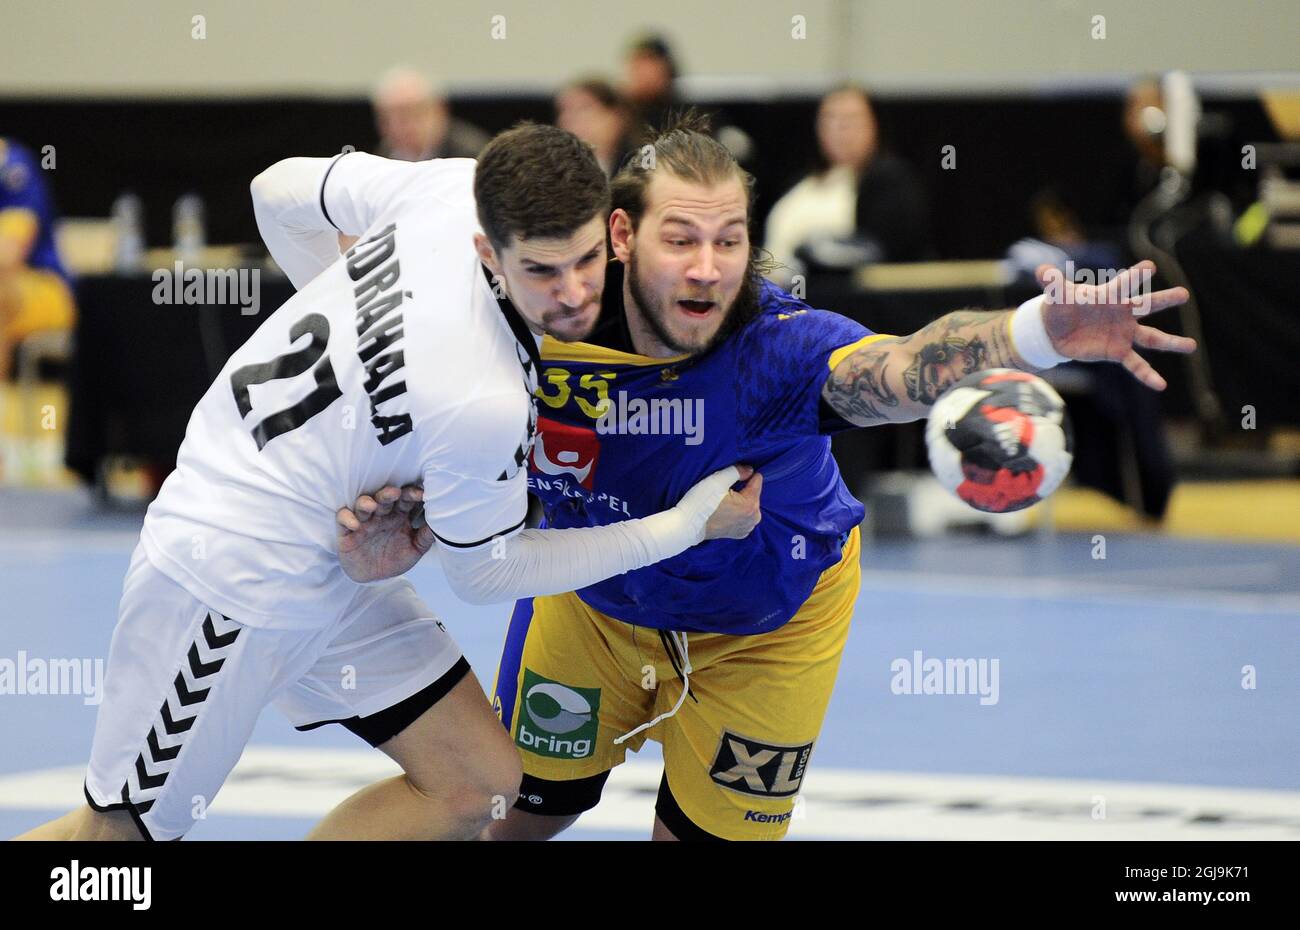 MALMO 20160105 Czech Ondrej Zdrahala, left, fights for the ball with Sweden's Andreas Nilsson during the friendly handball match between Sweden and Czech Republic in Malmo, Sweden, on Jan. 05, 2016. Photo: Bjorn Lindgren / TT / code 9204  Stock Photo